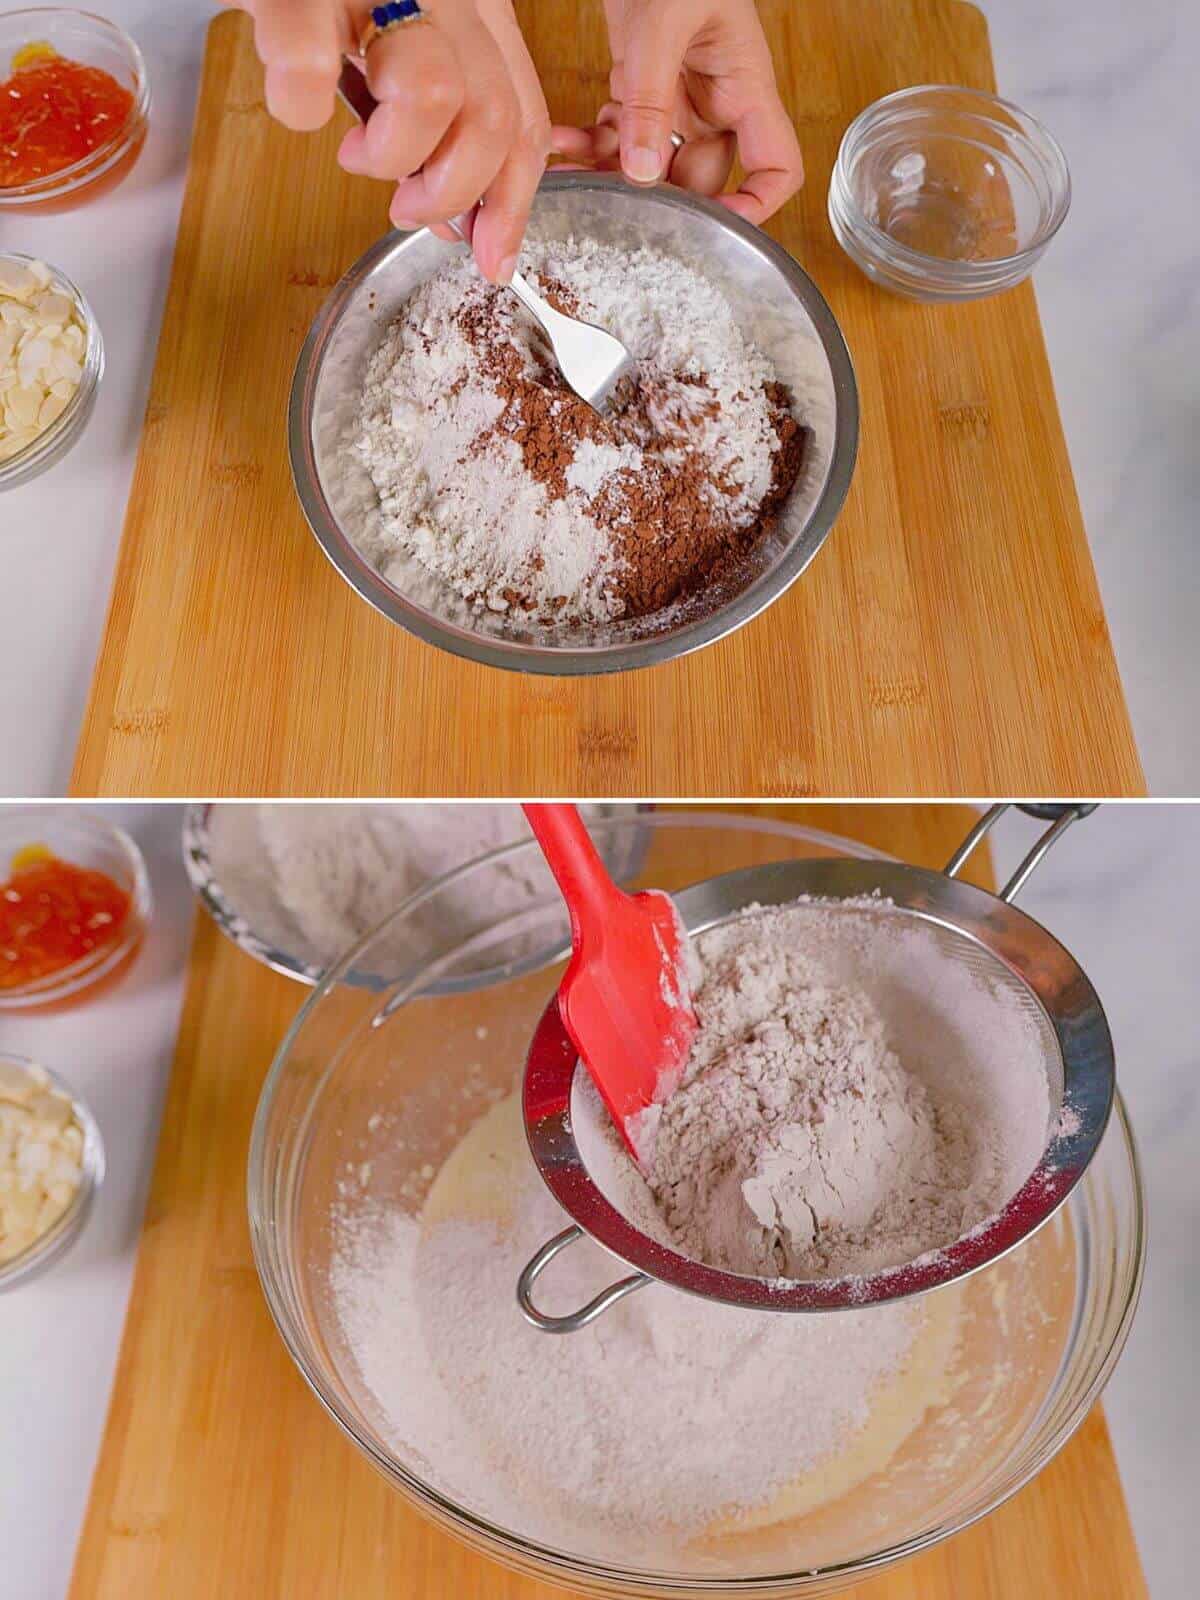 Combining dry ingredients and sifting into wet ingredients.